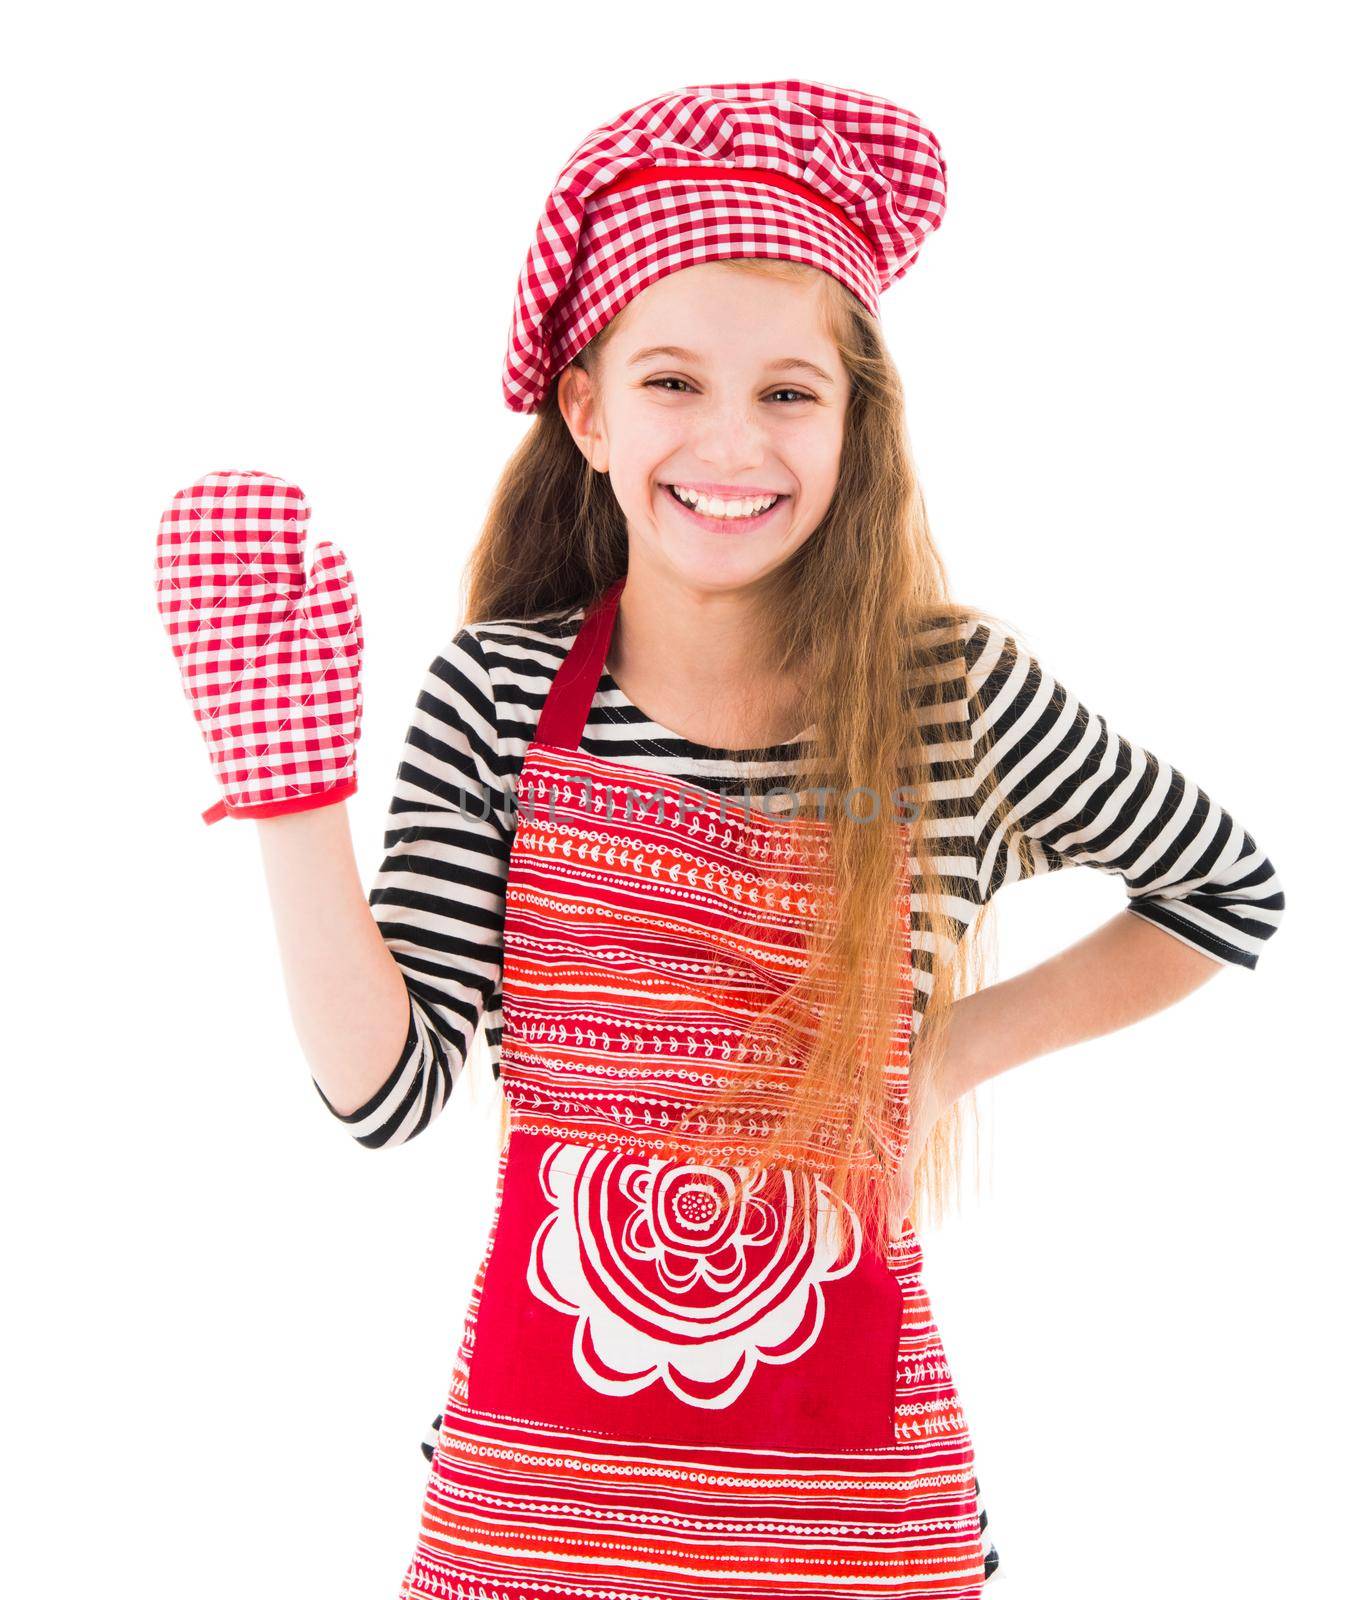 Little positive girl in red apron and red baking glove waving isolated on white background